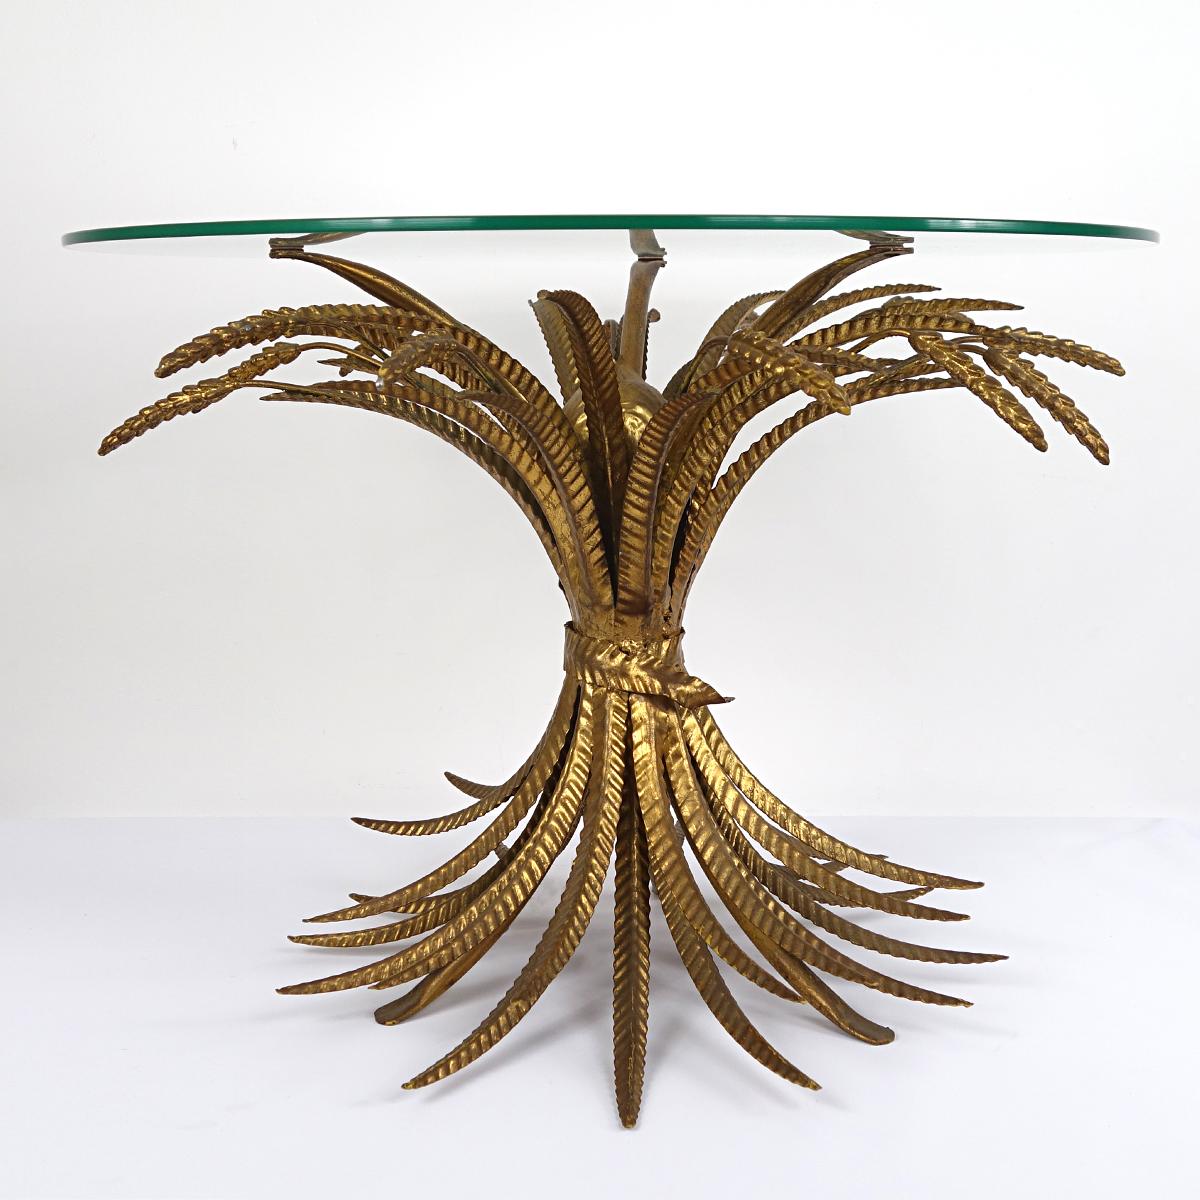 Gorgeous occasional or coffee table consisting of a nature inspired base made of gilded sheaves of wheat, with a round glass top.
This is the kind of table the famous French designer Coco Chanel had in her acclaimed apartment interior. Très chic !